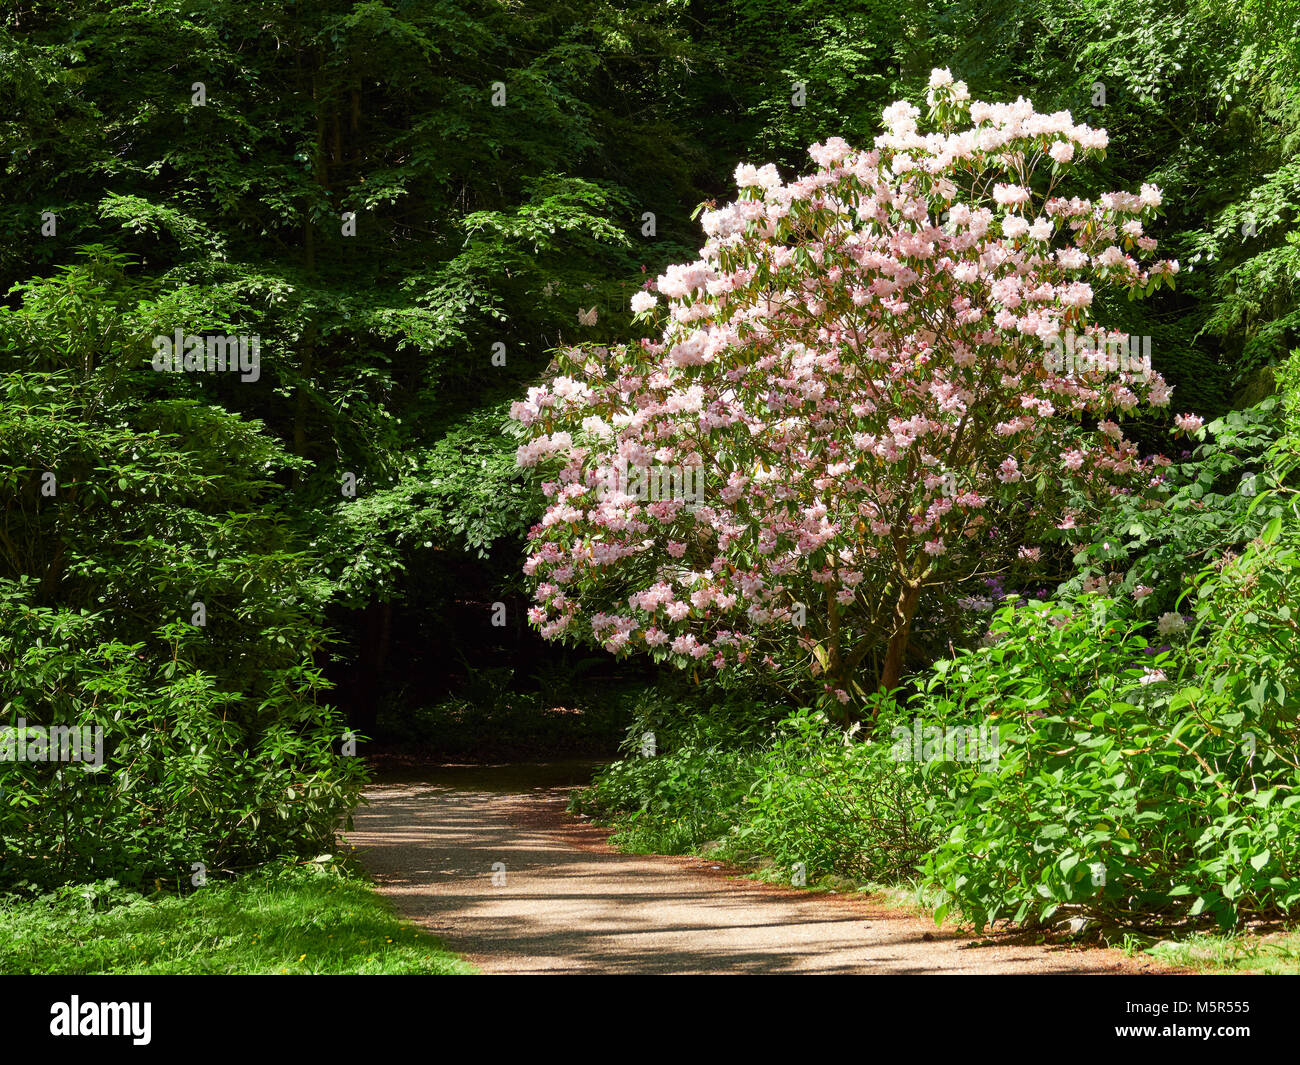 Large pink Rhododendron bush highlighted by the sunlight agains dark green foliage of trees Stock Photo